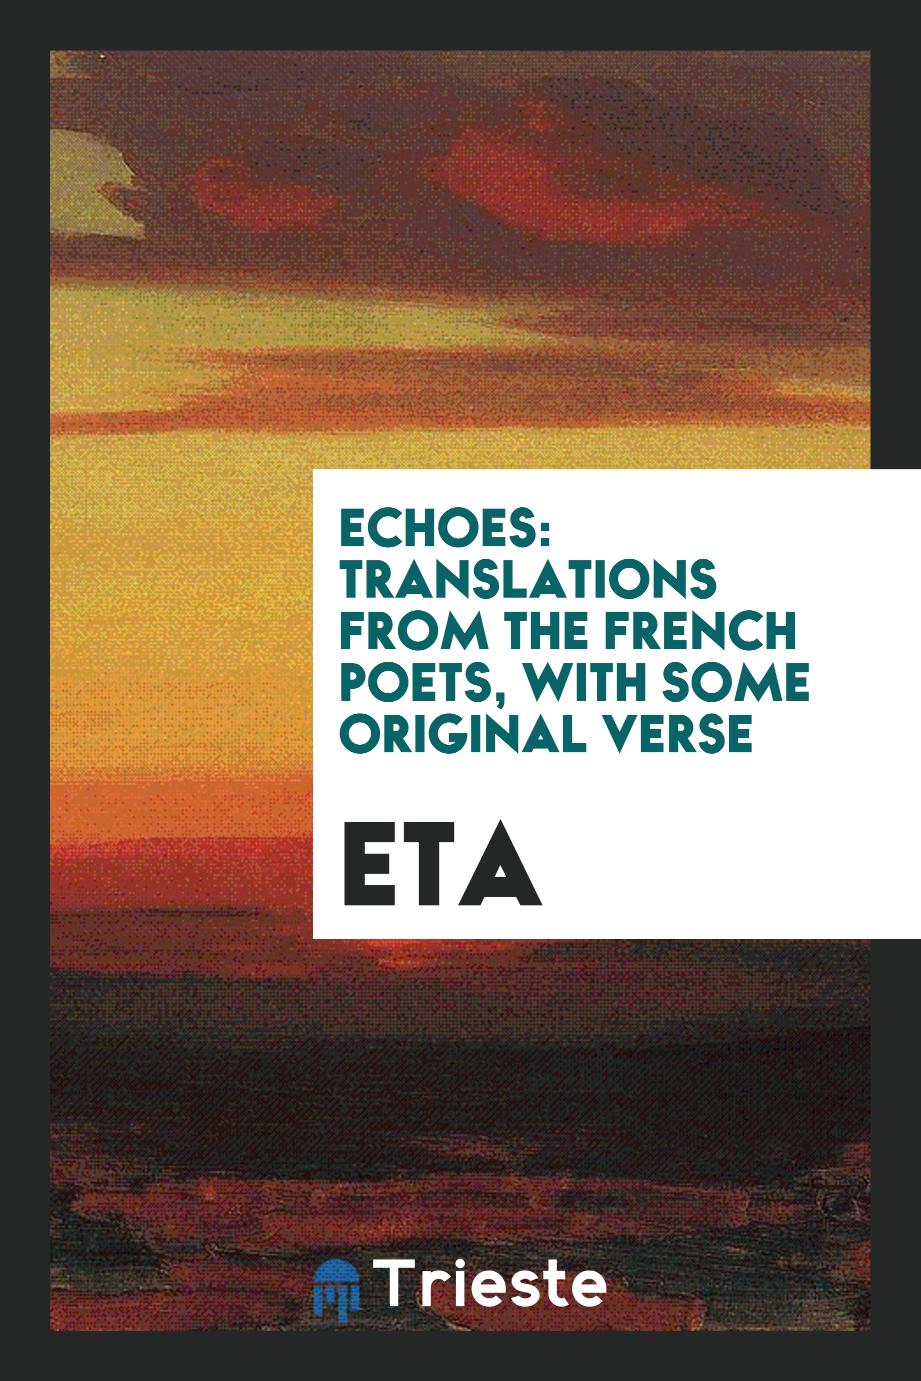 Echoes: translations from the French poets, with some original verse